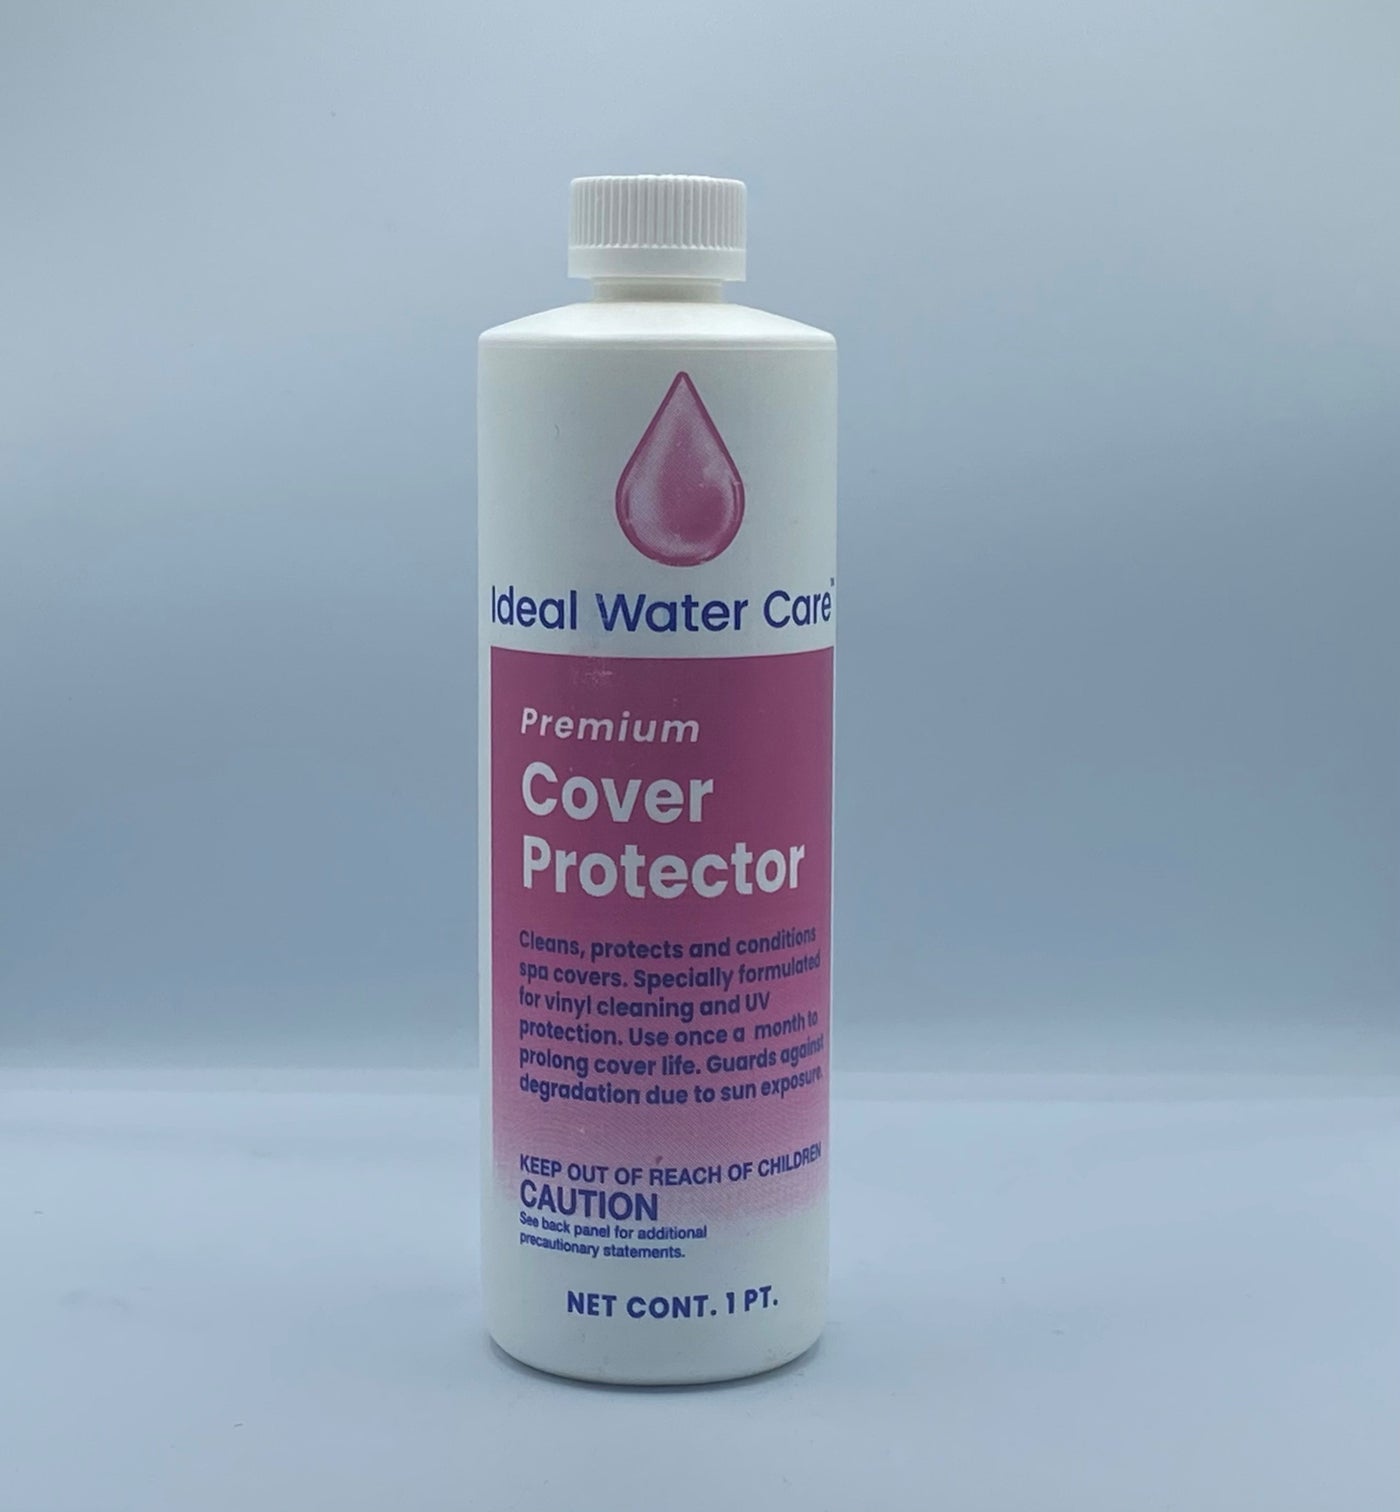 Ideal Water Care Cover Protector | Hot Tub Lady